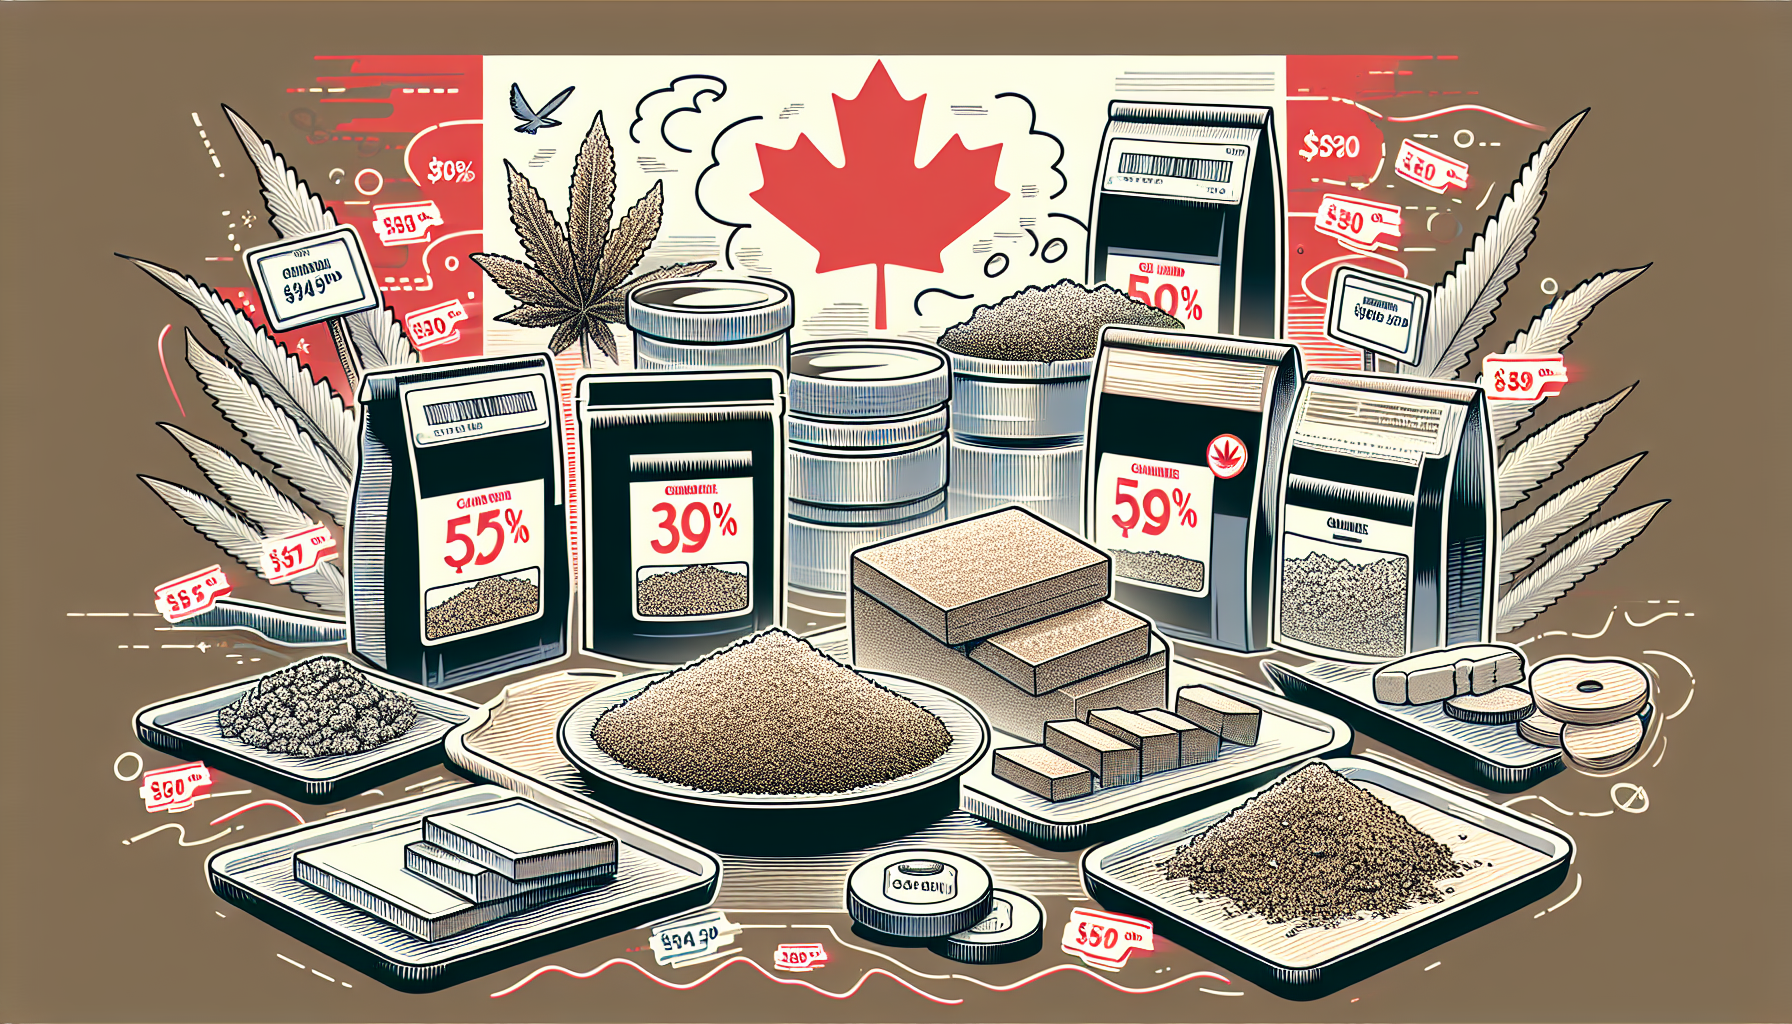 Visual representation of wholesale hash deals and promotions in Canada